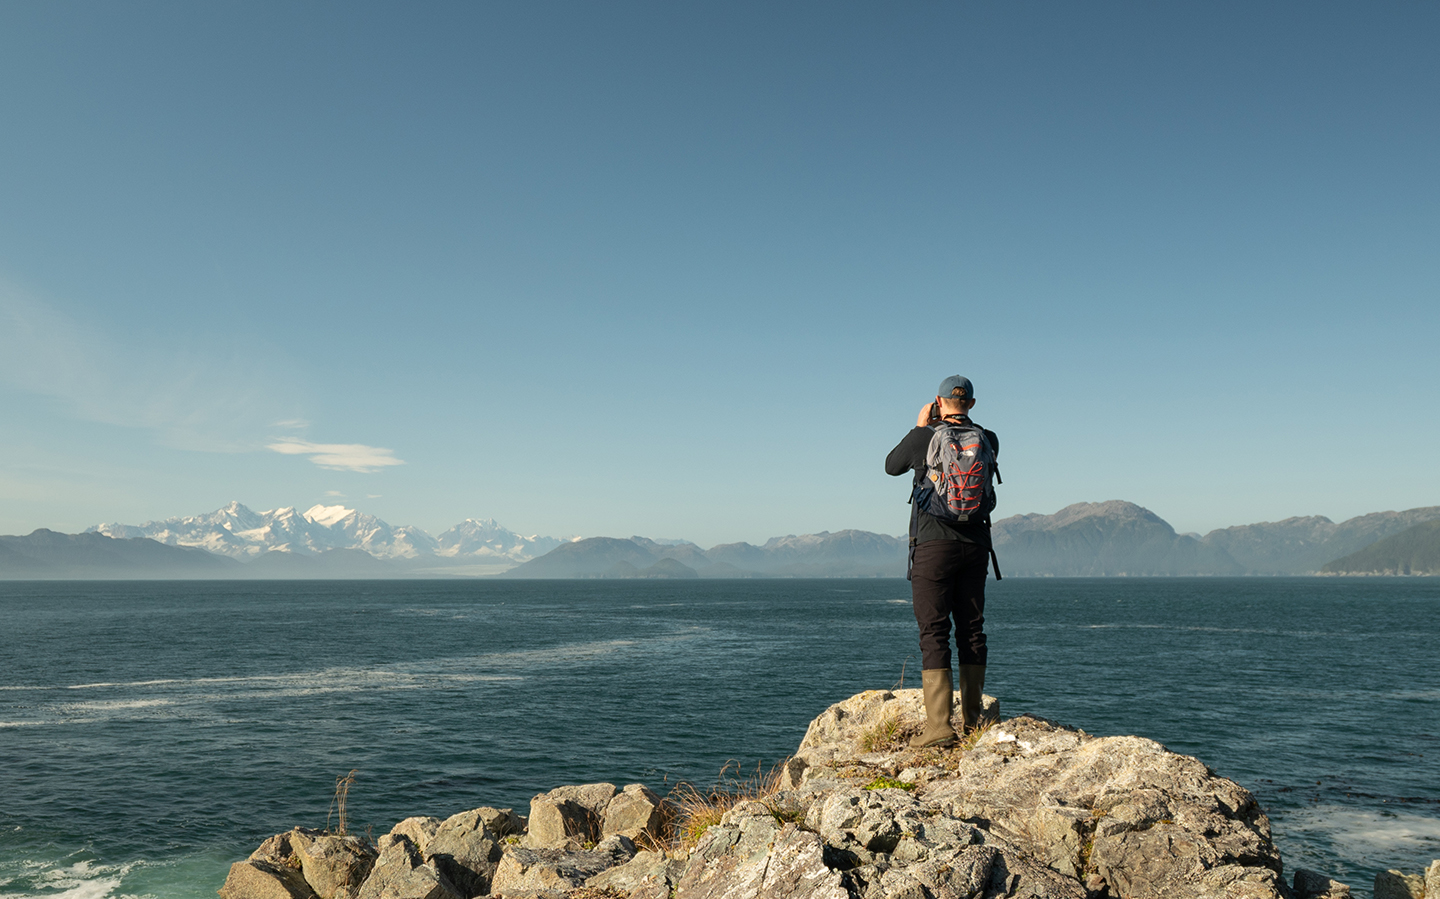 A man in boots stands on rocks facing away from the camera looking out to the ocean with snowcapped mountains